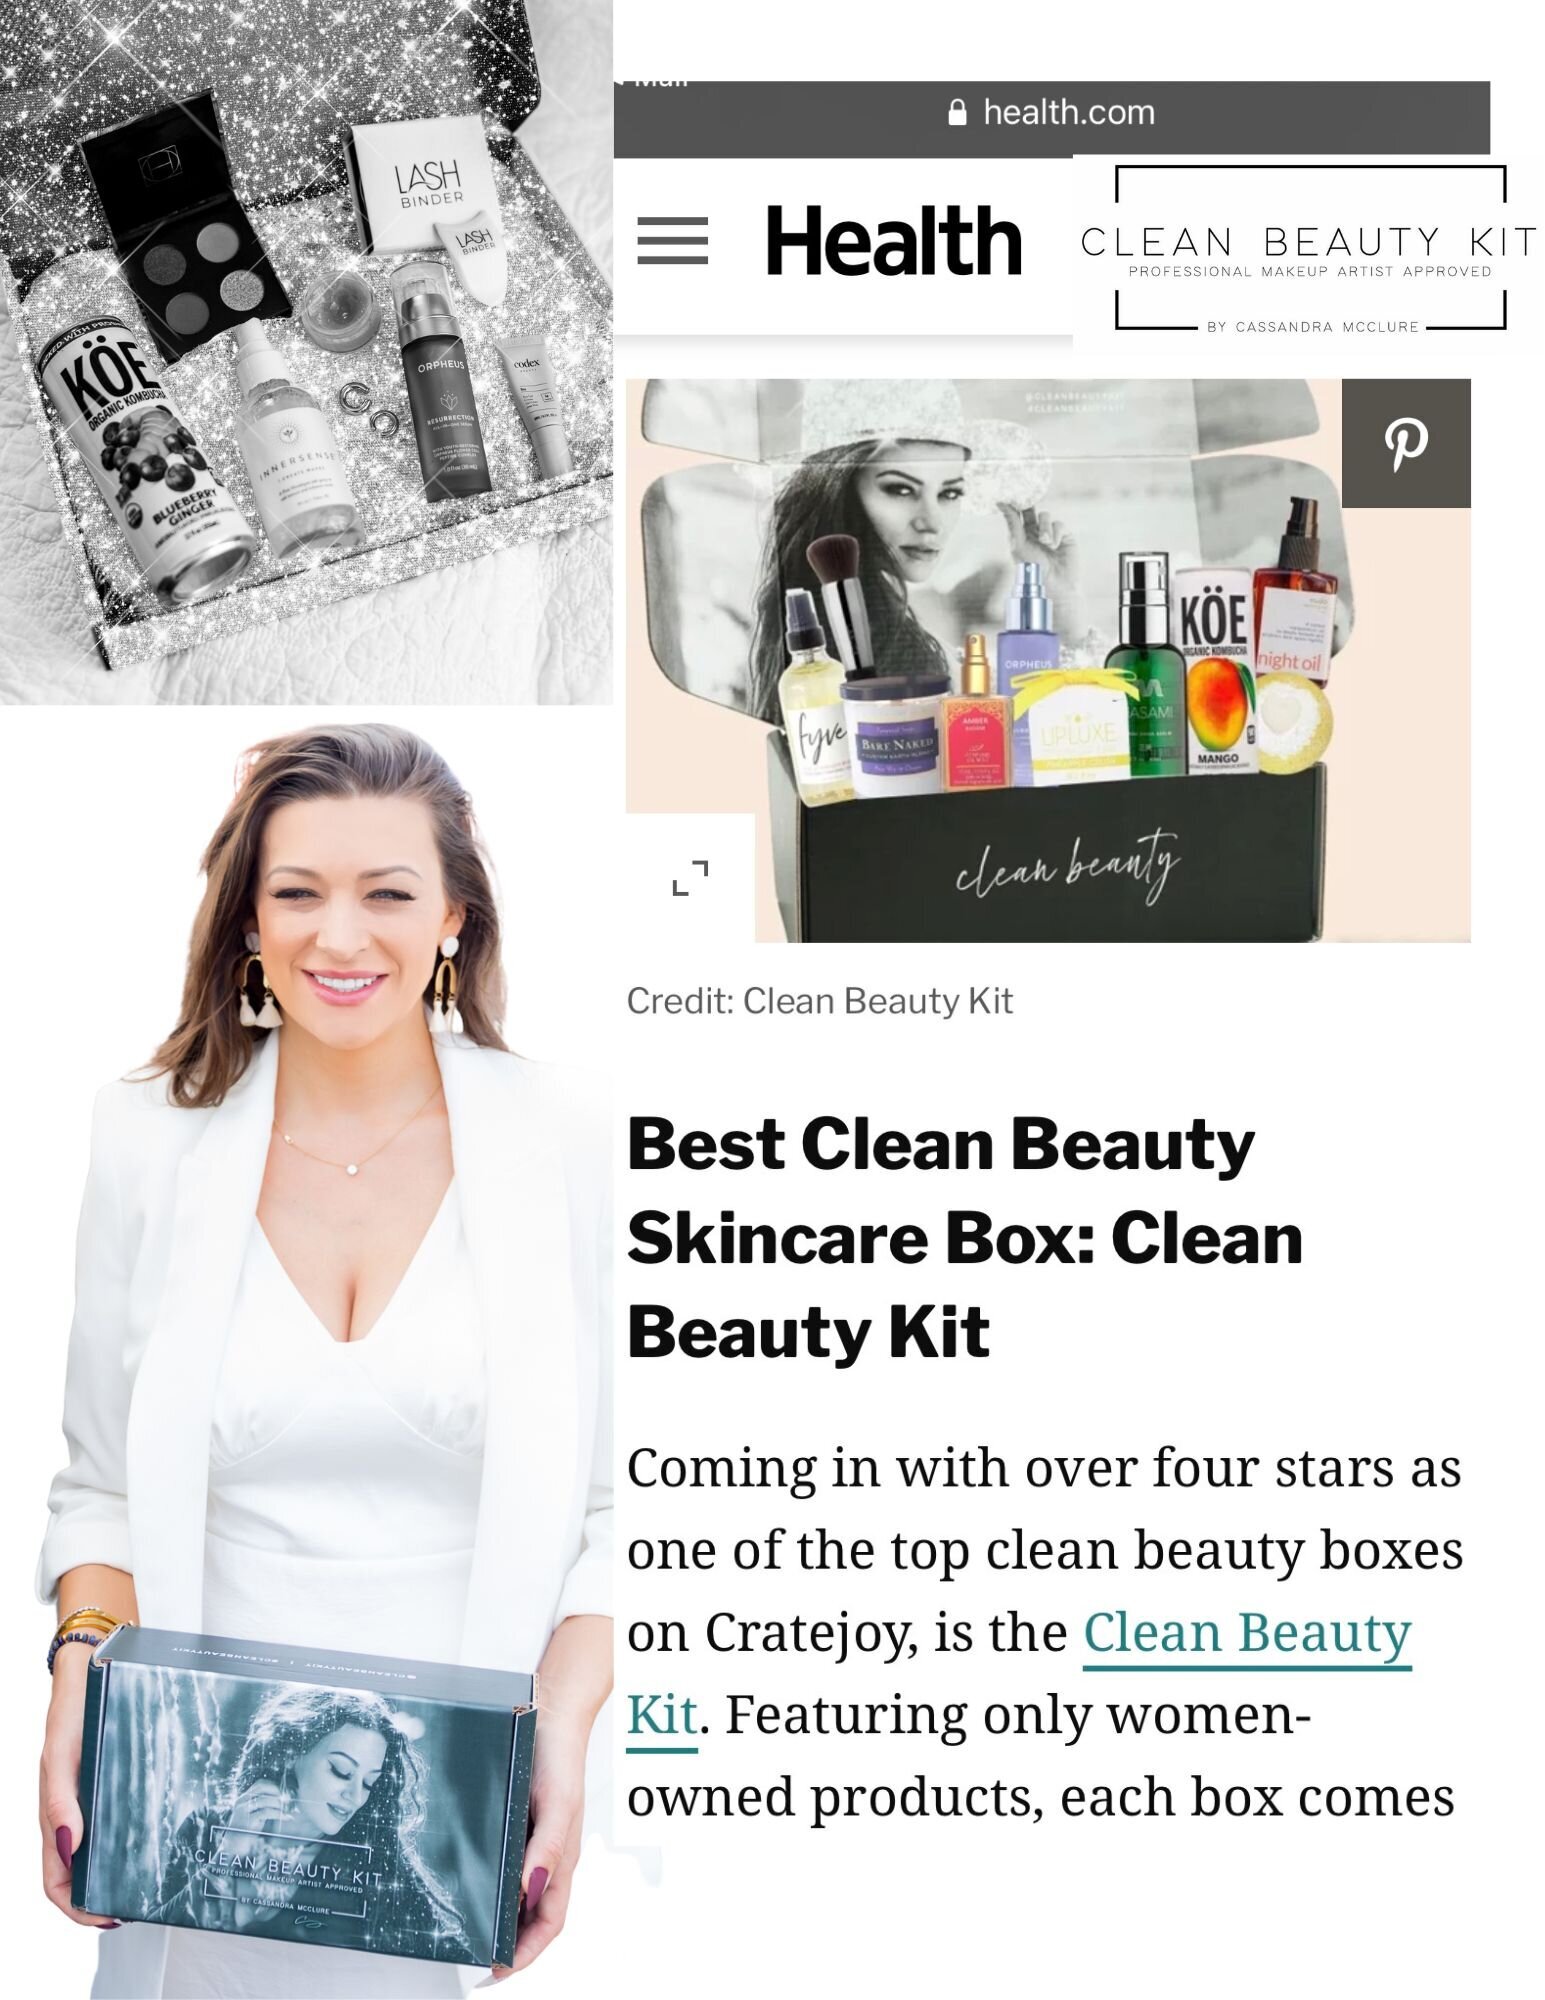 Health Magazine featuring Cassandra McClure and her Clean Beauty Kit